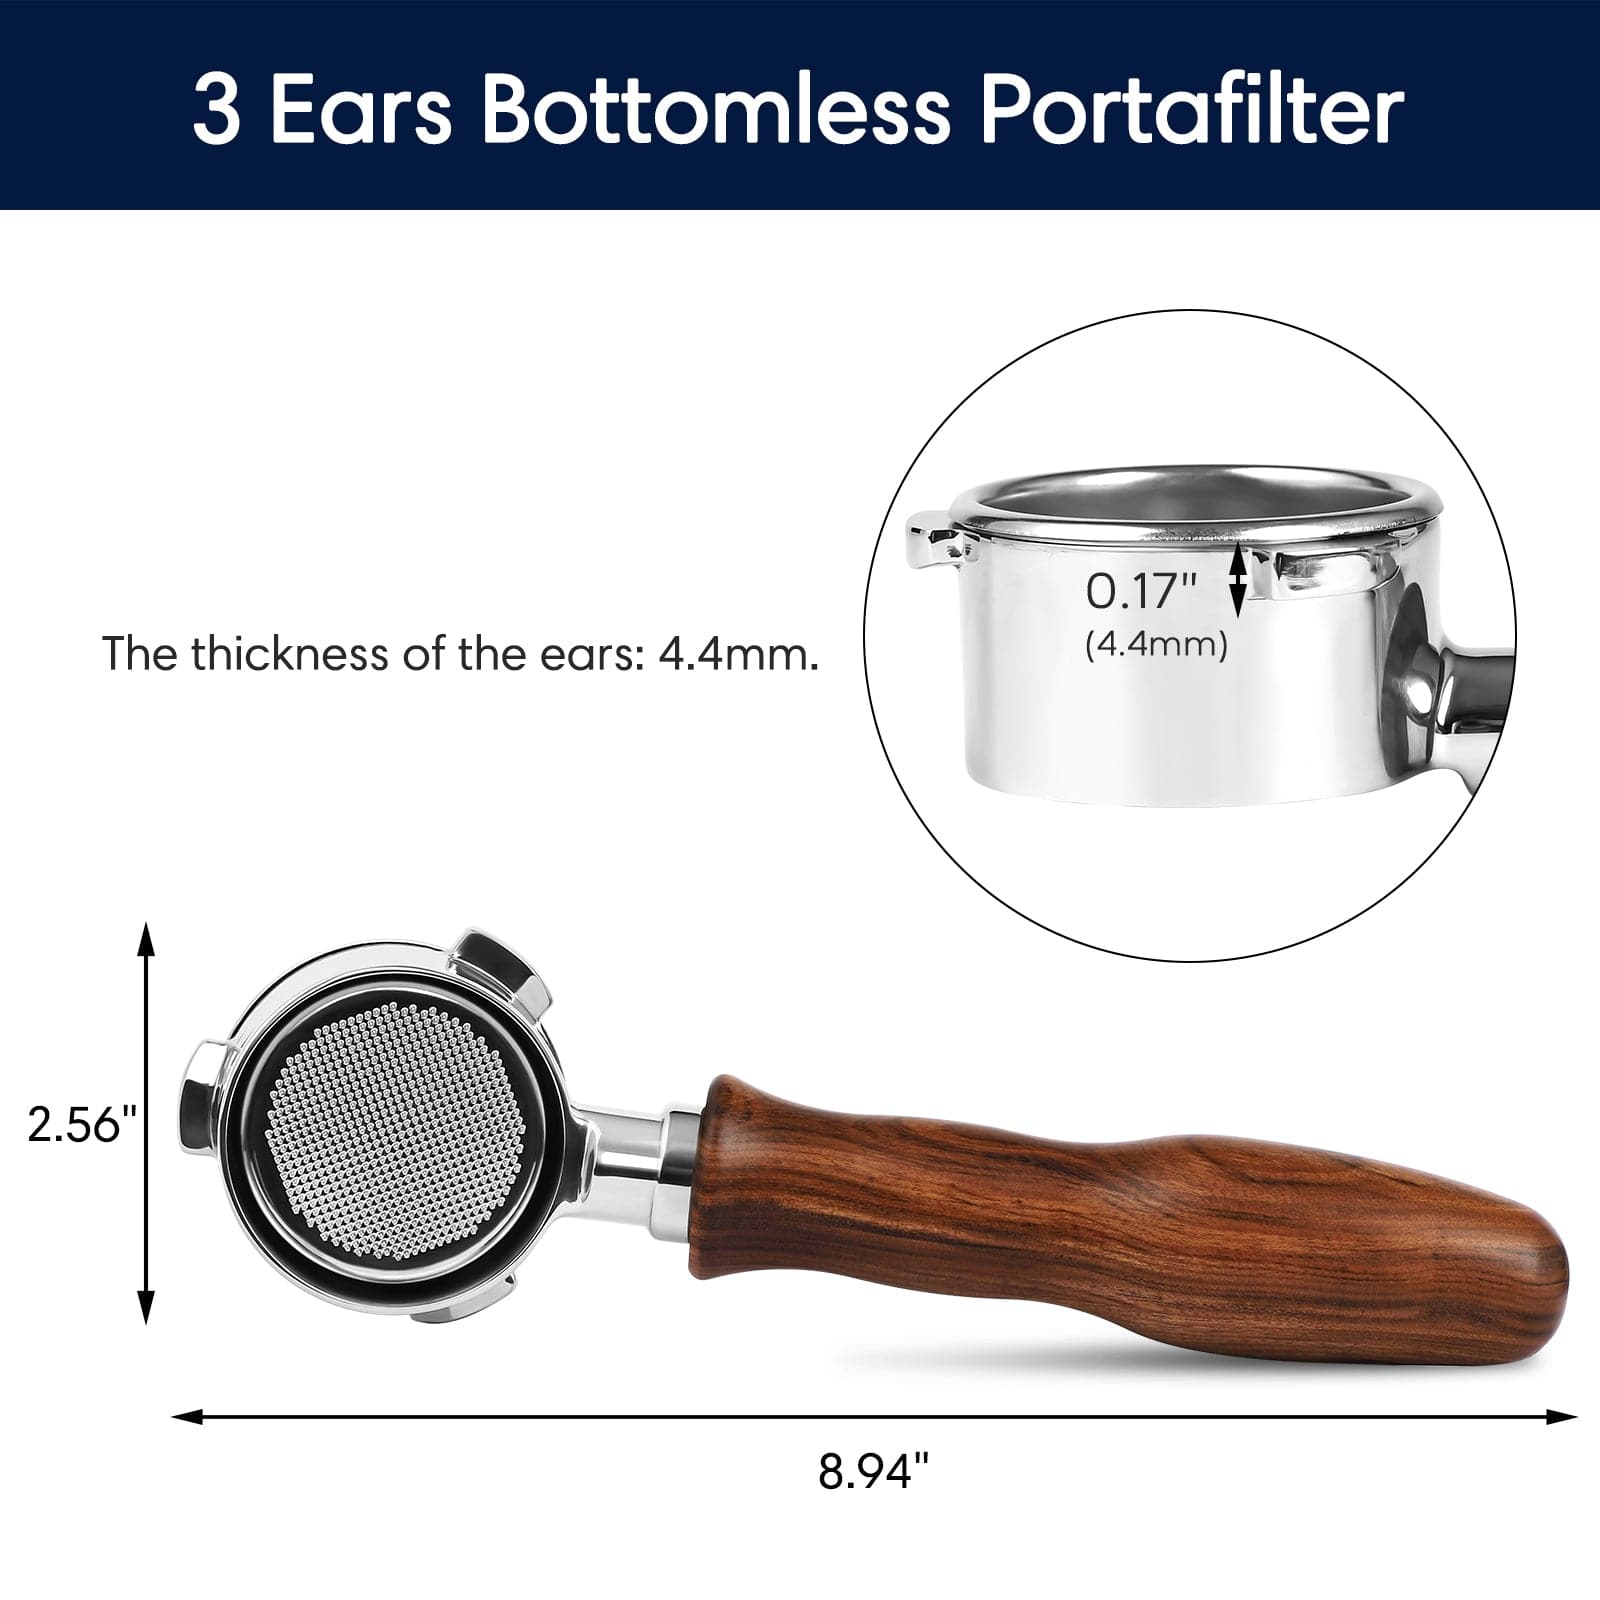 51mm Bottomless Stainless-steel Portafilter with 3 Ears